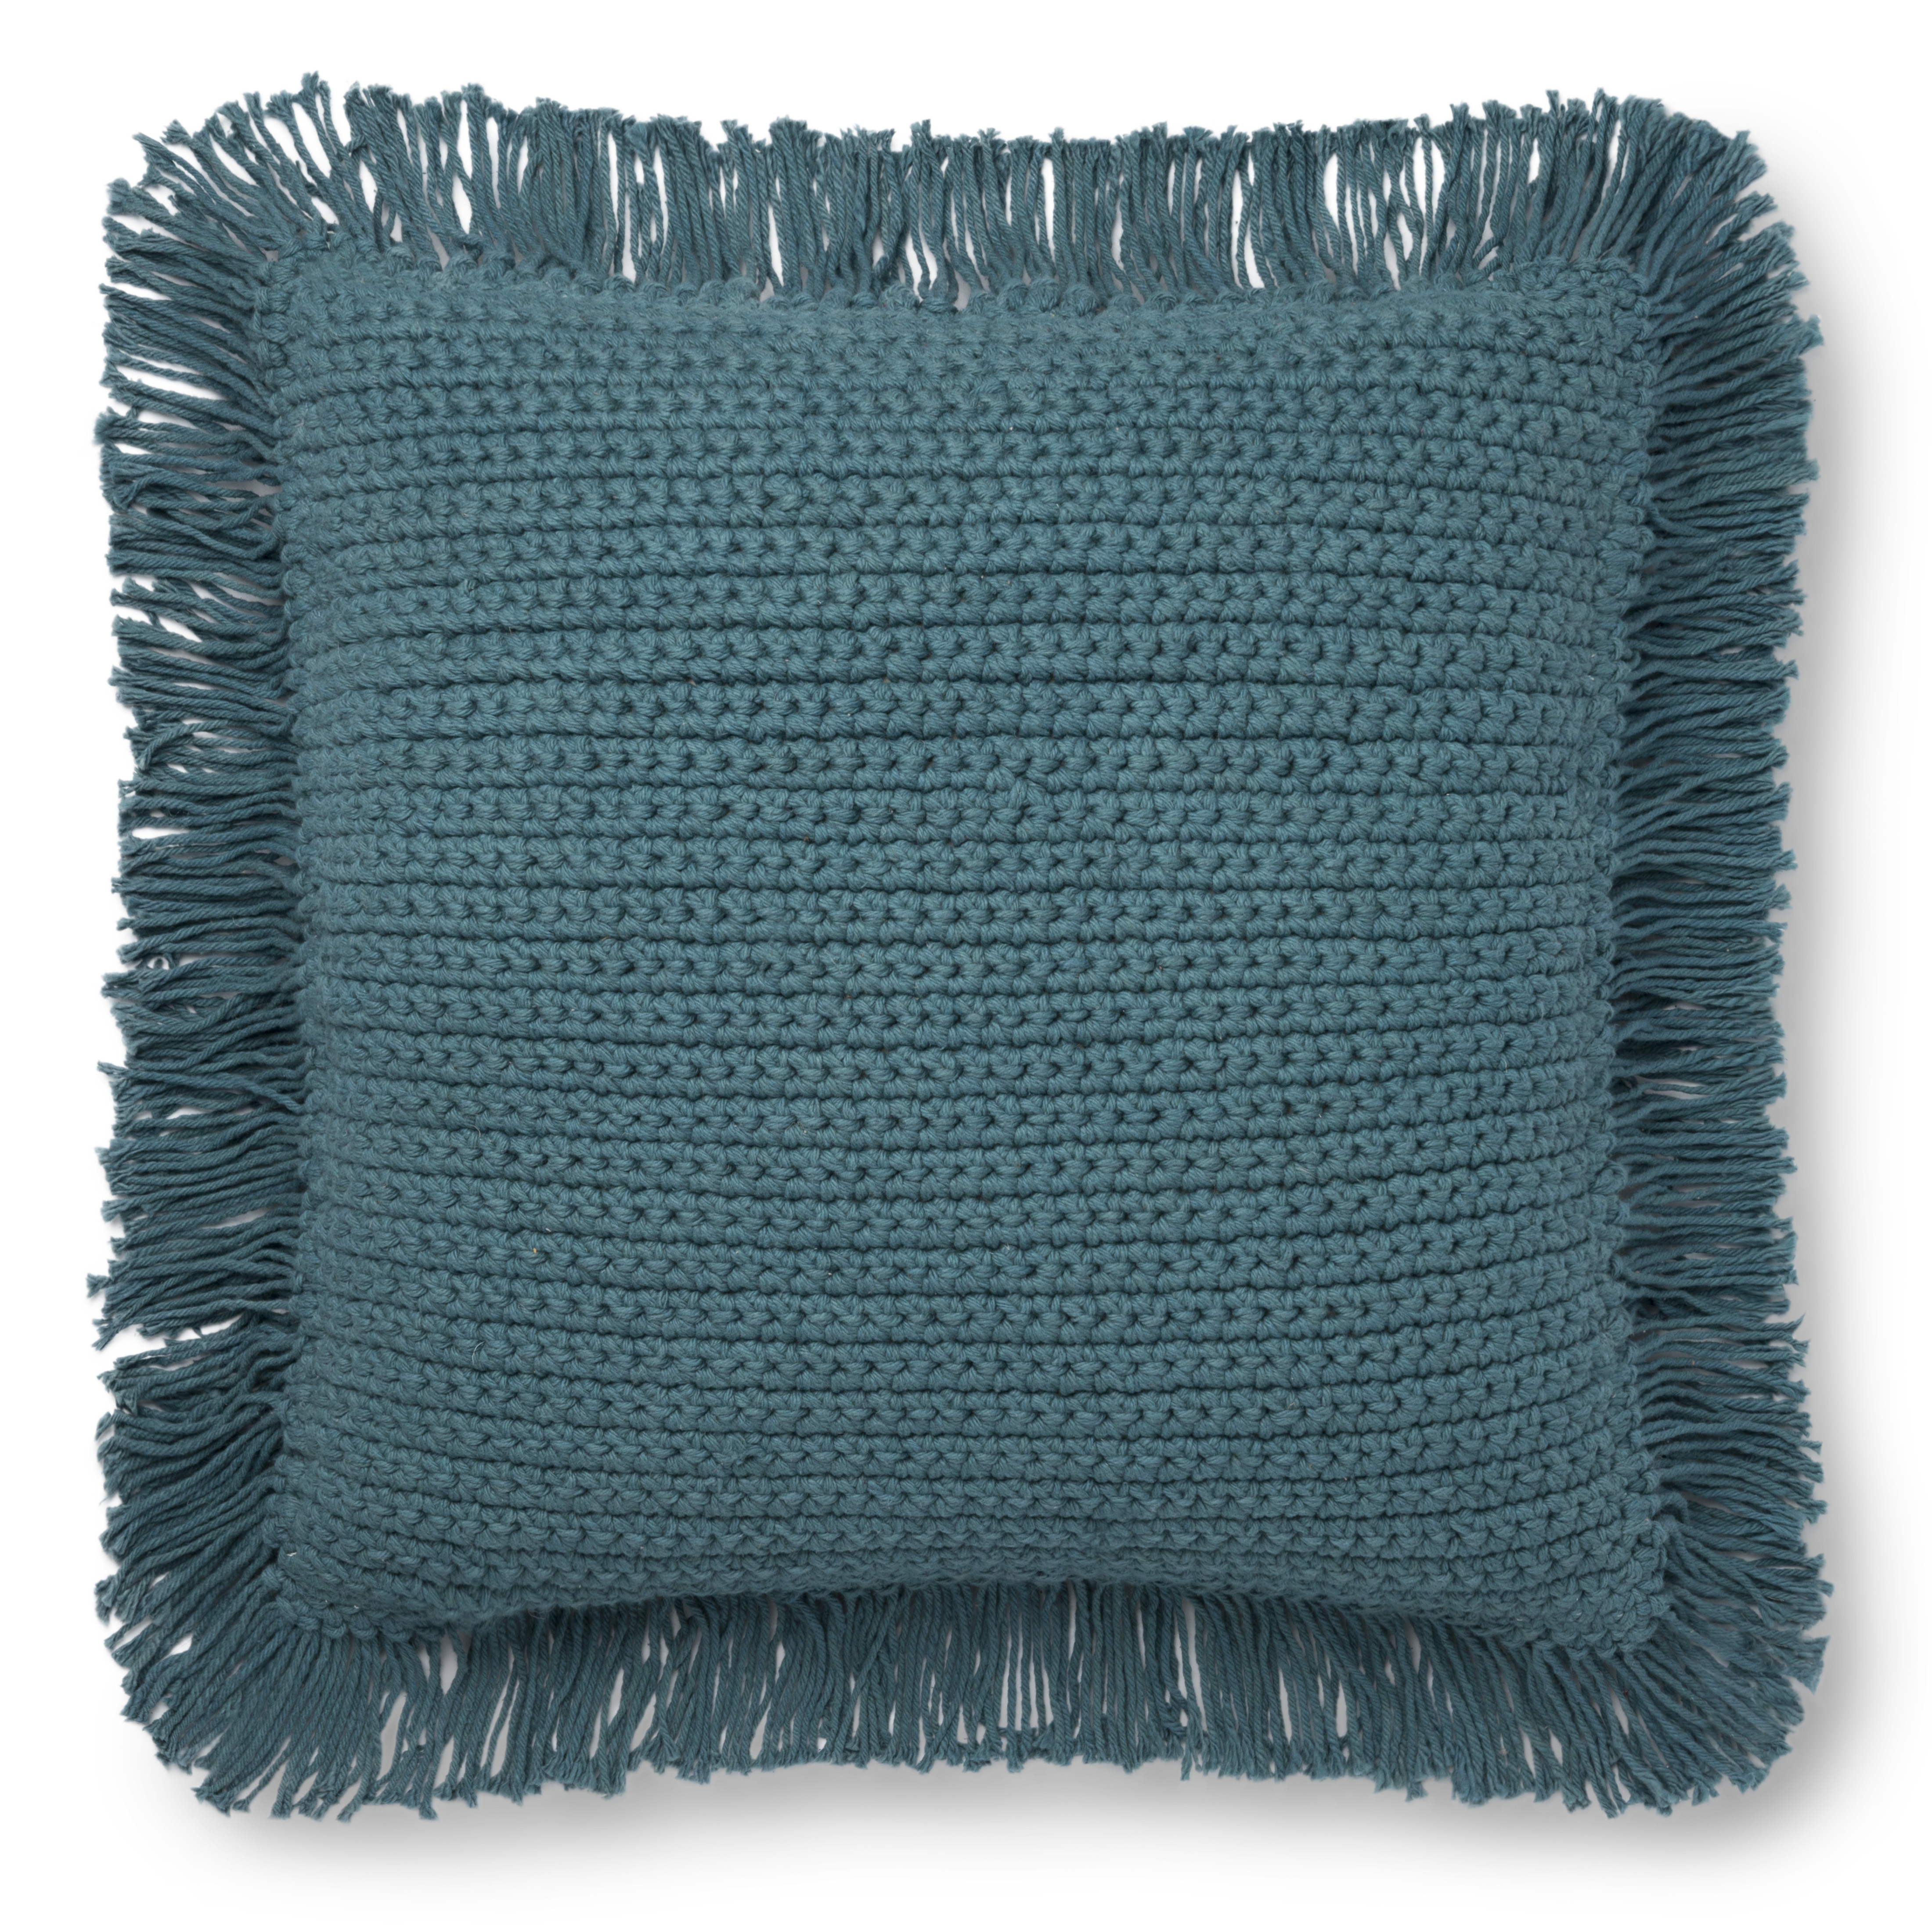 Justina Blakeney x Loloi PILLOWS P0806 Teal 22" x 22" Cover Only - Image 0